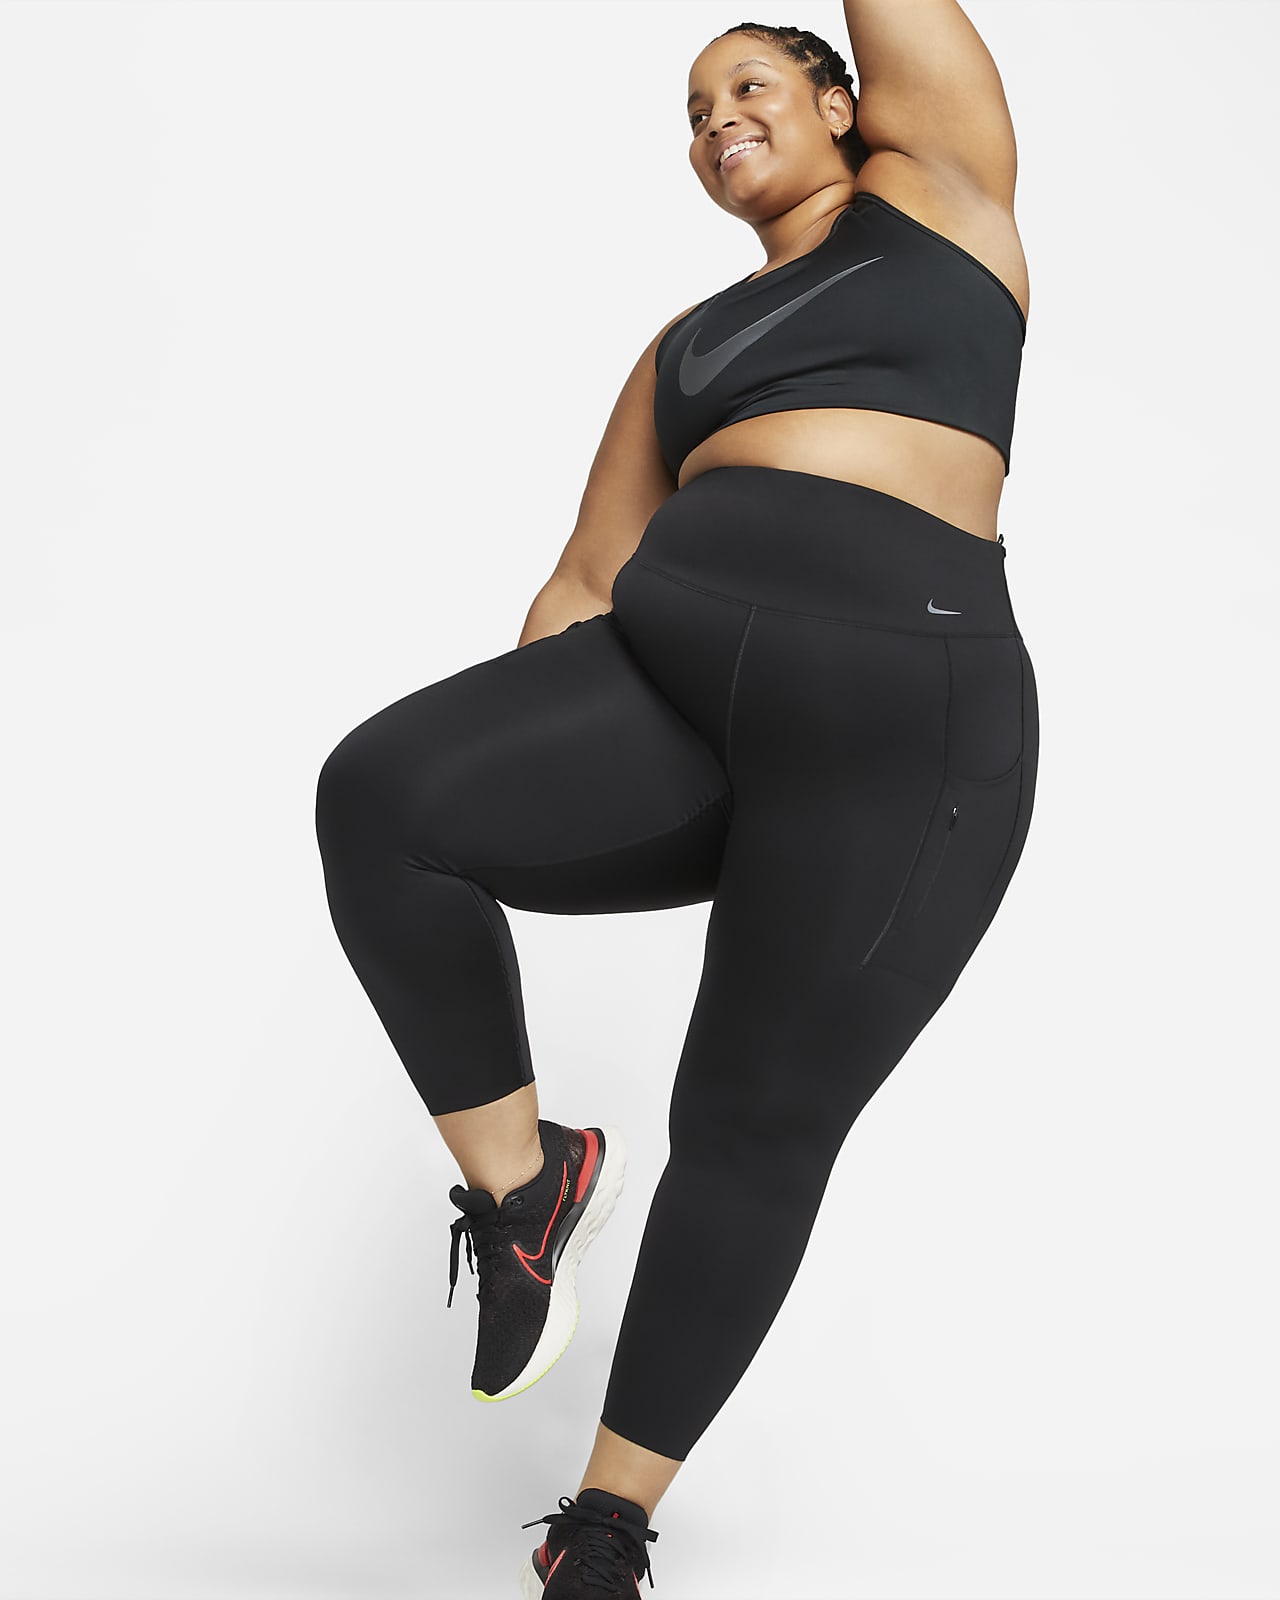 Nike Go Women's Firm-Support High-Waisted 7/8 Leggings Pockets (Plus Size). Nike.com